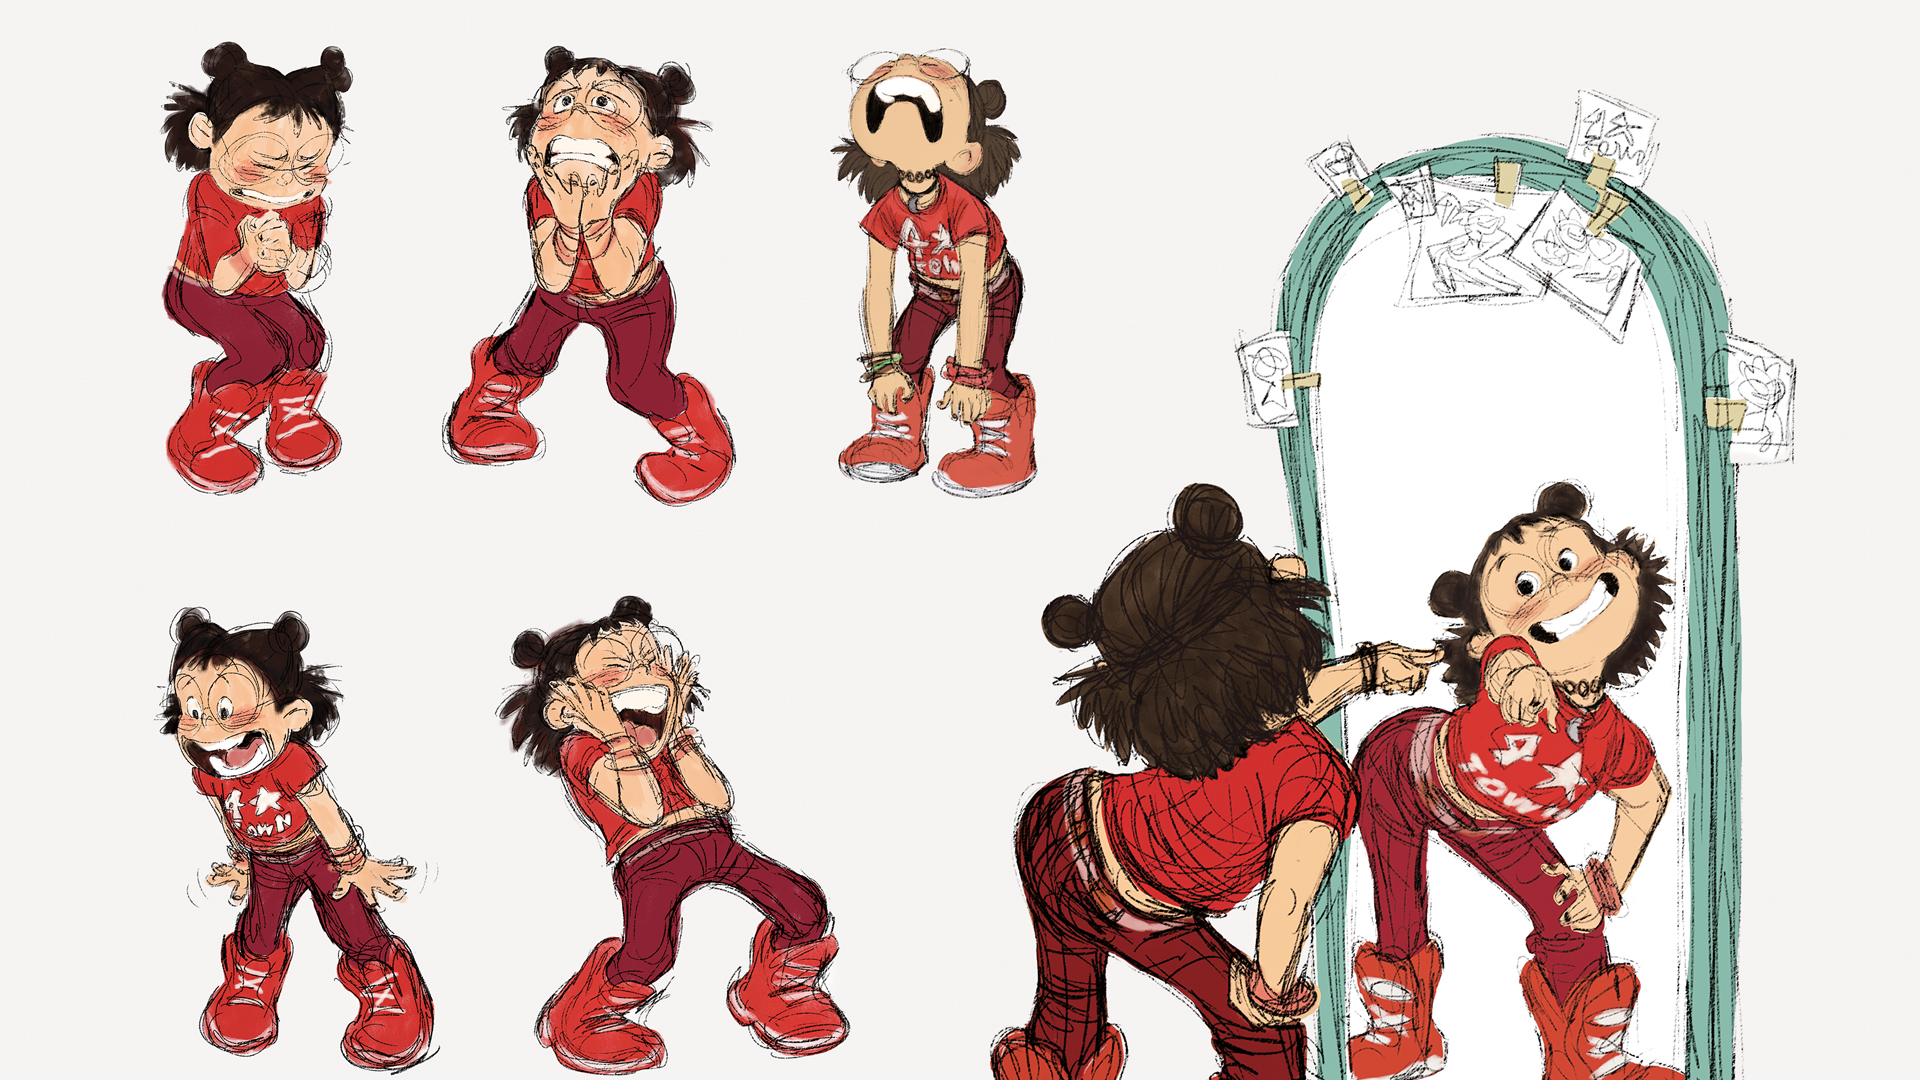 Concept art of Meilin Lee for Pixar's Turning Red